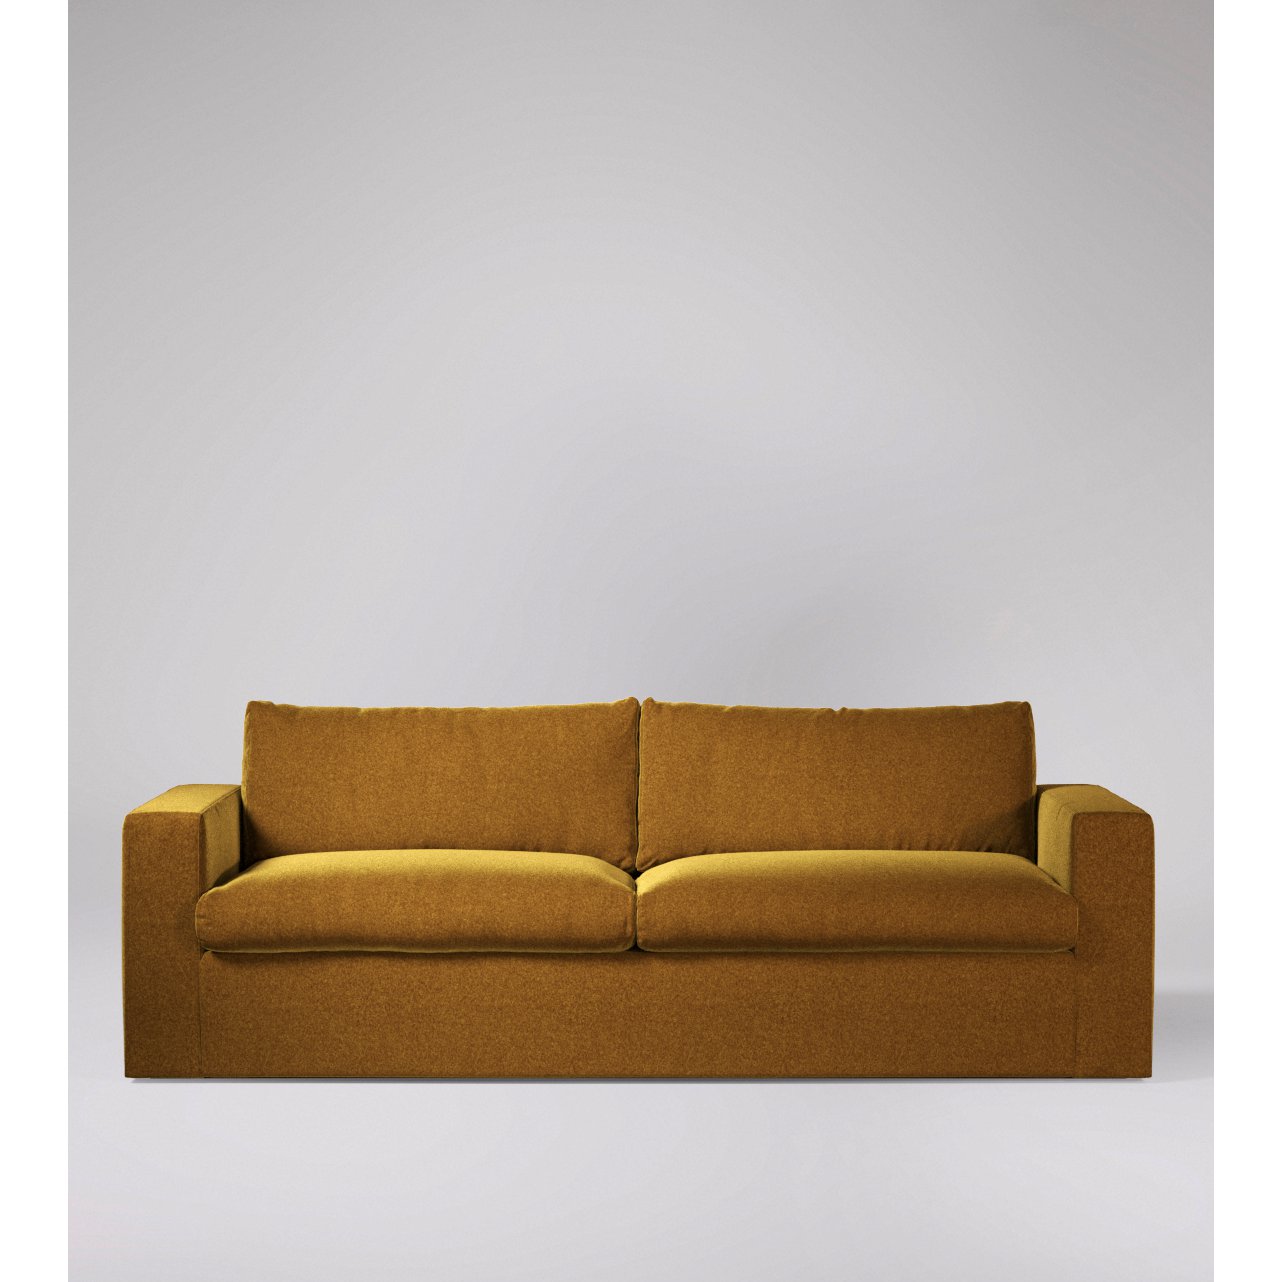 Swoon - Evesham - Sofabed - Yellow - Smart Wool